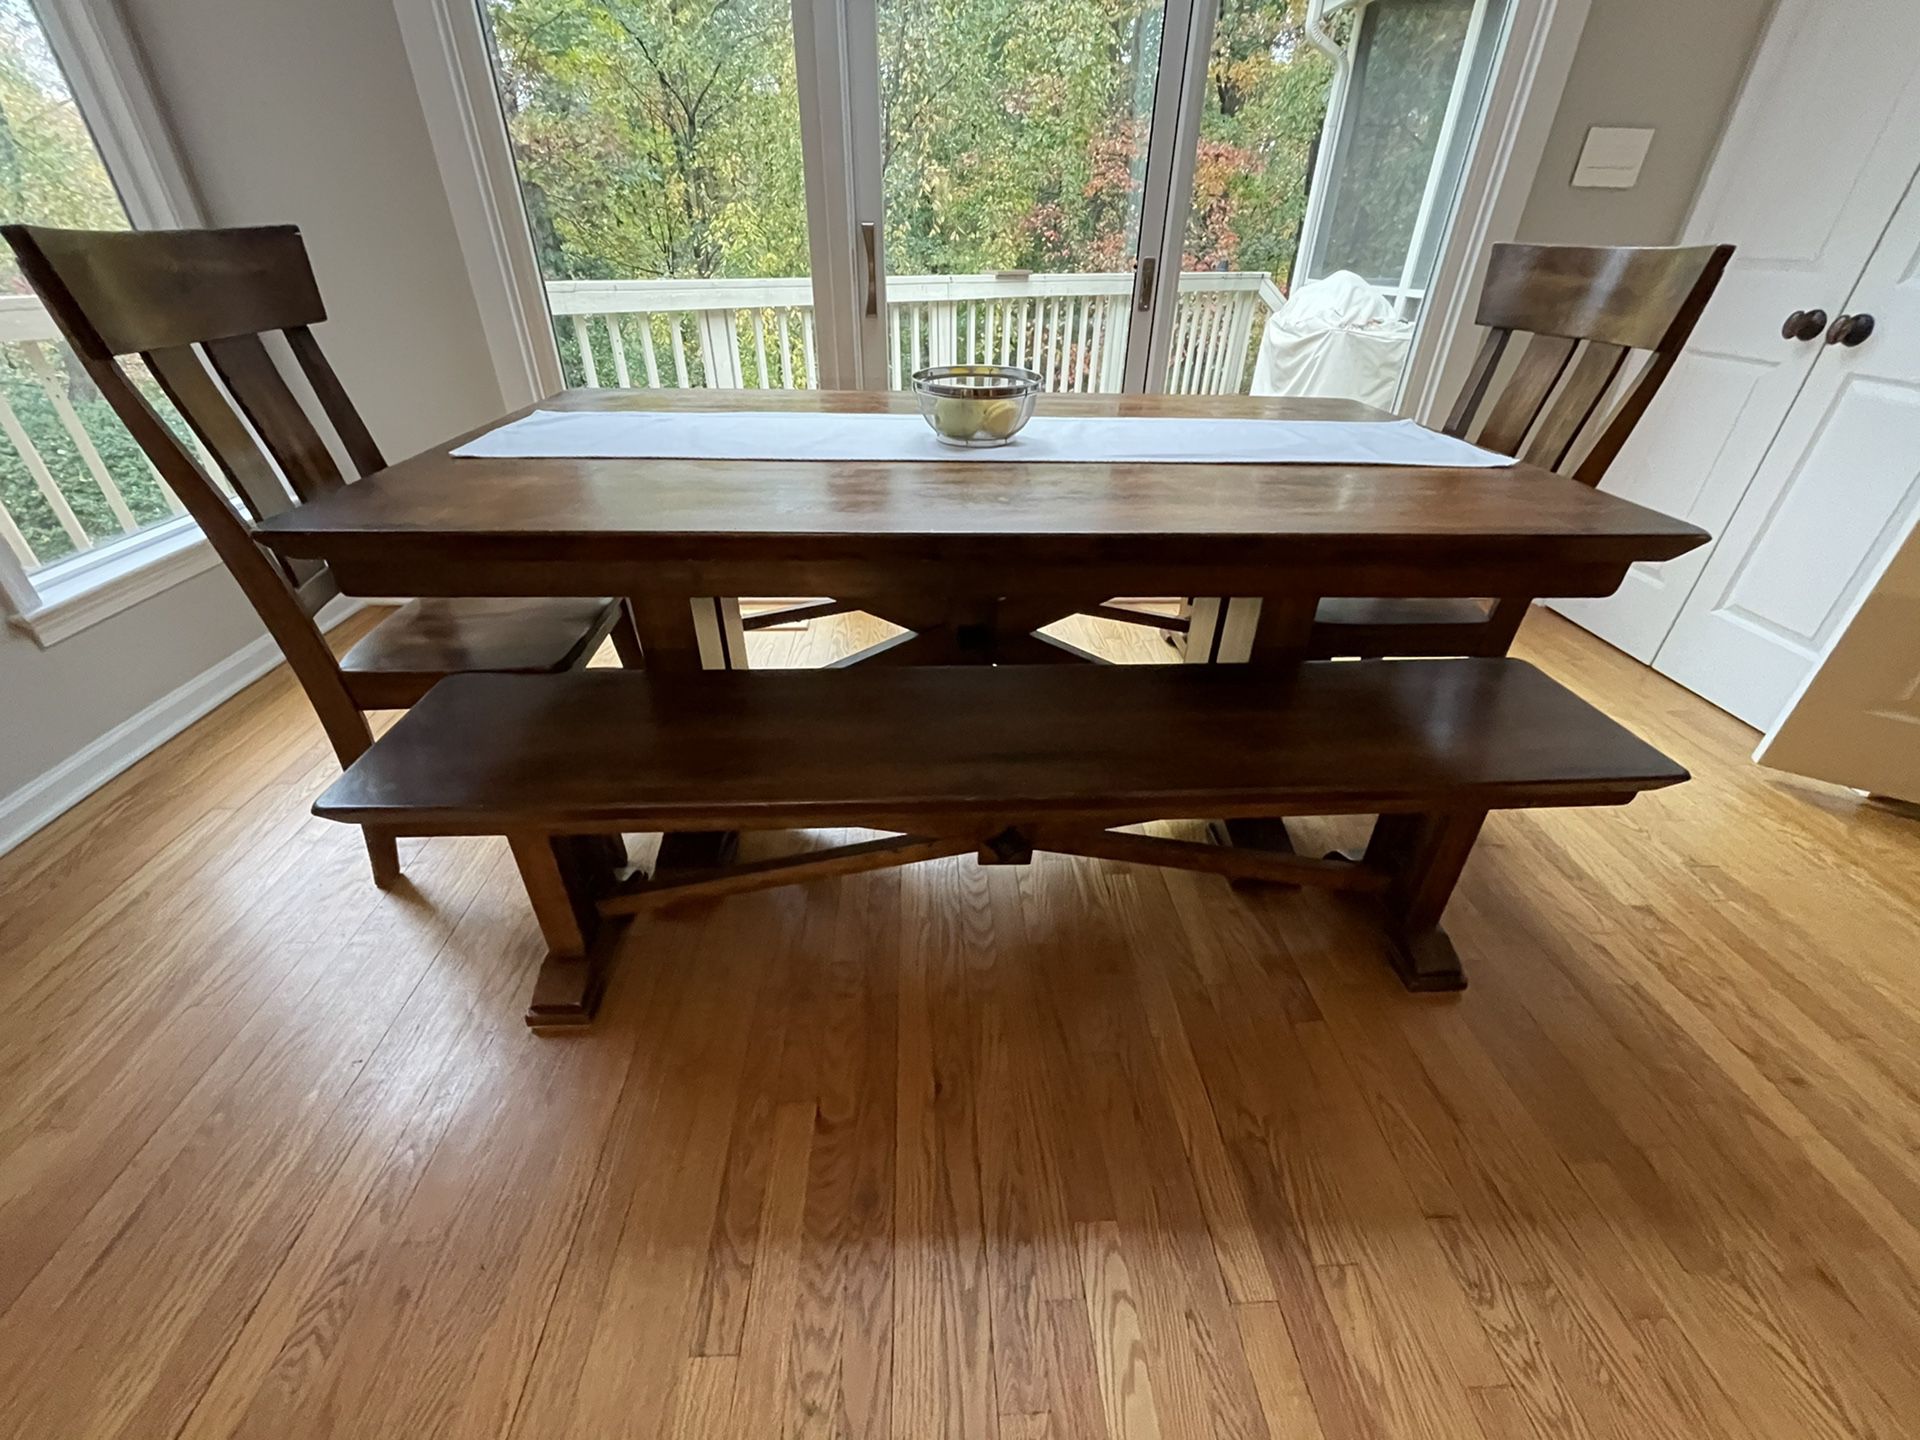 Wooden table with 2 benches and 2 chairs